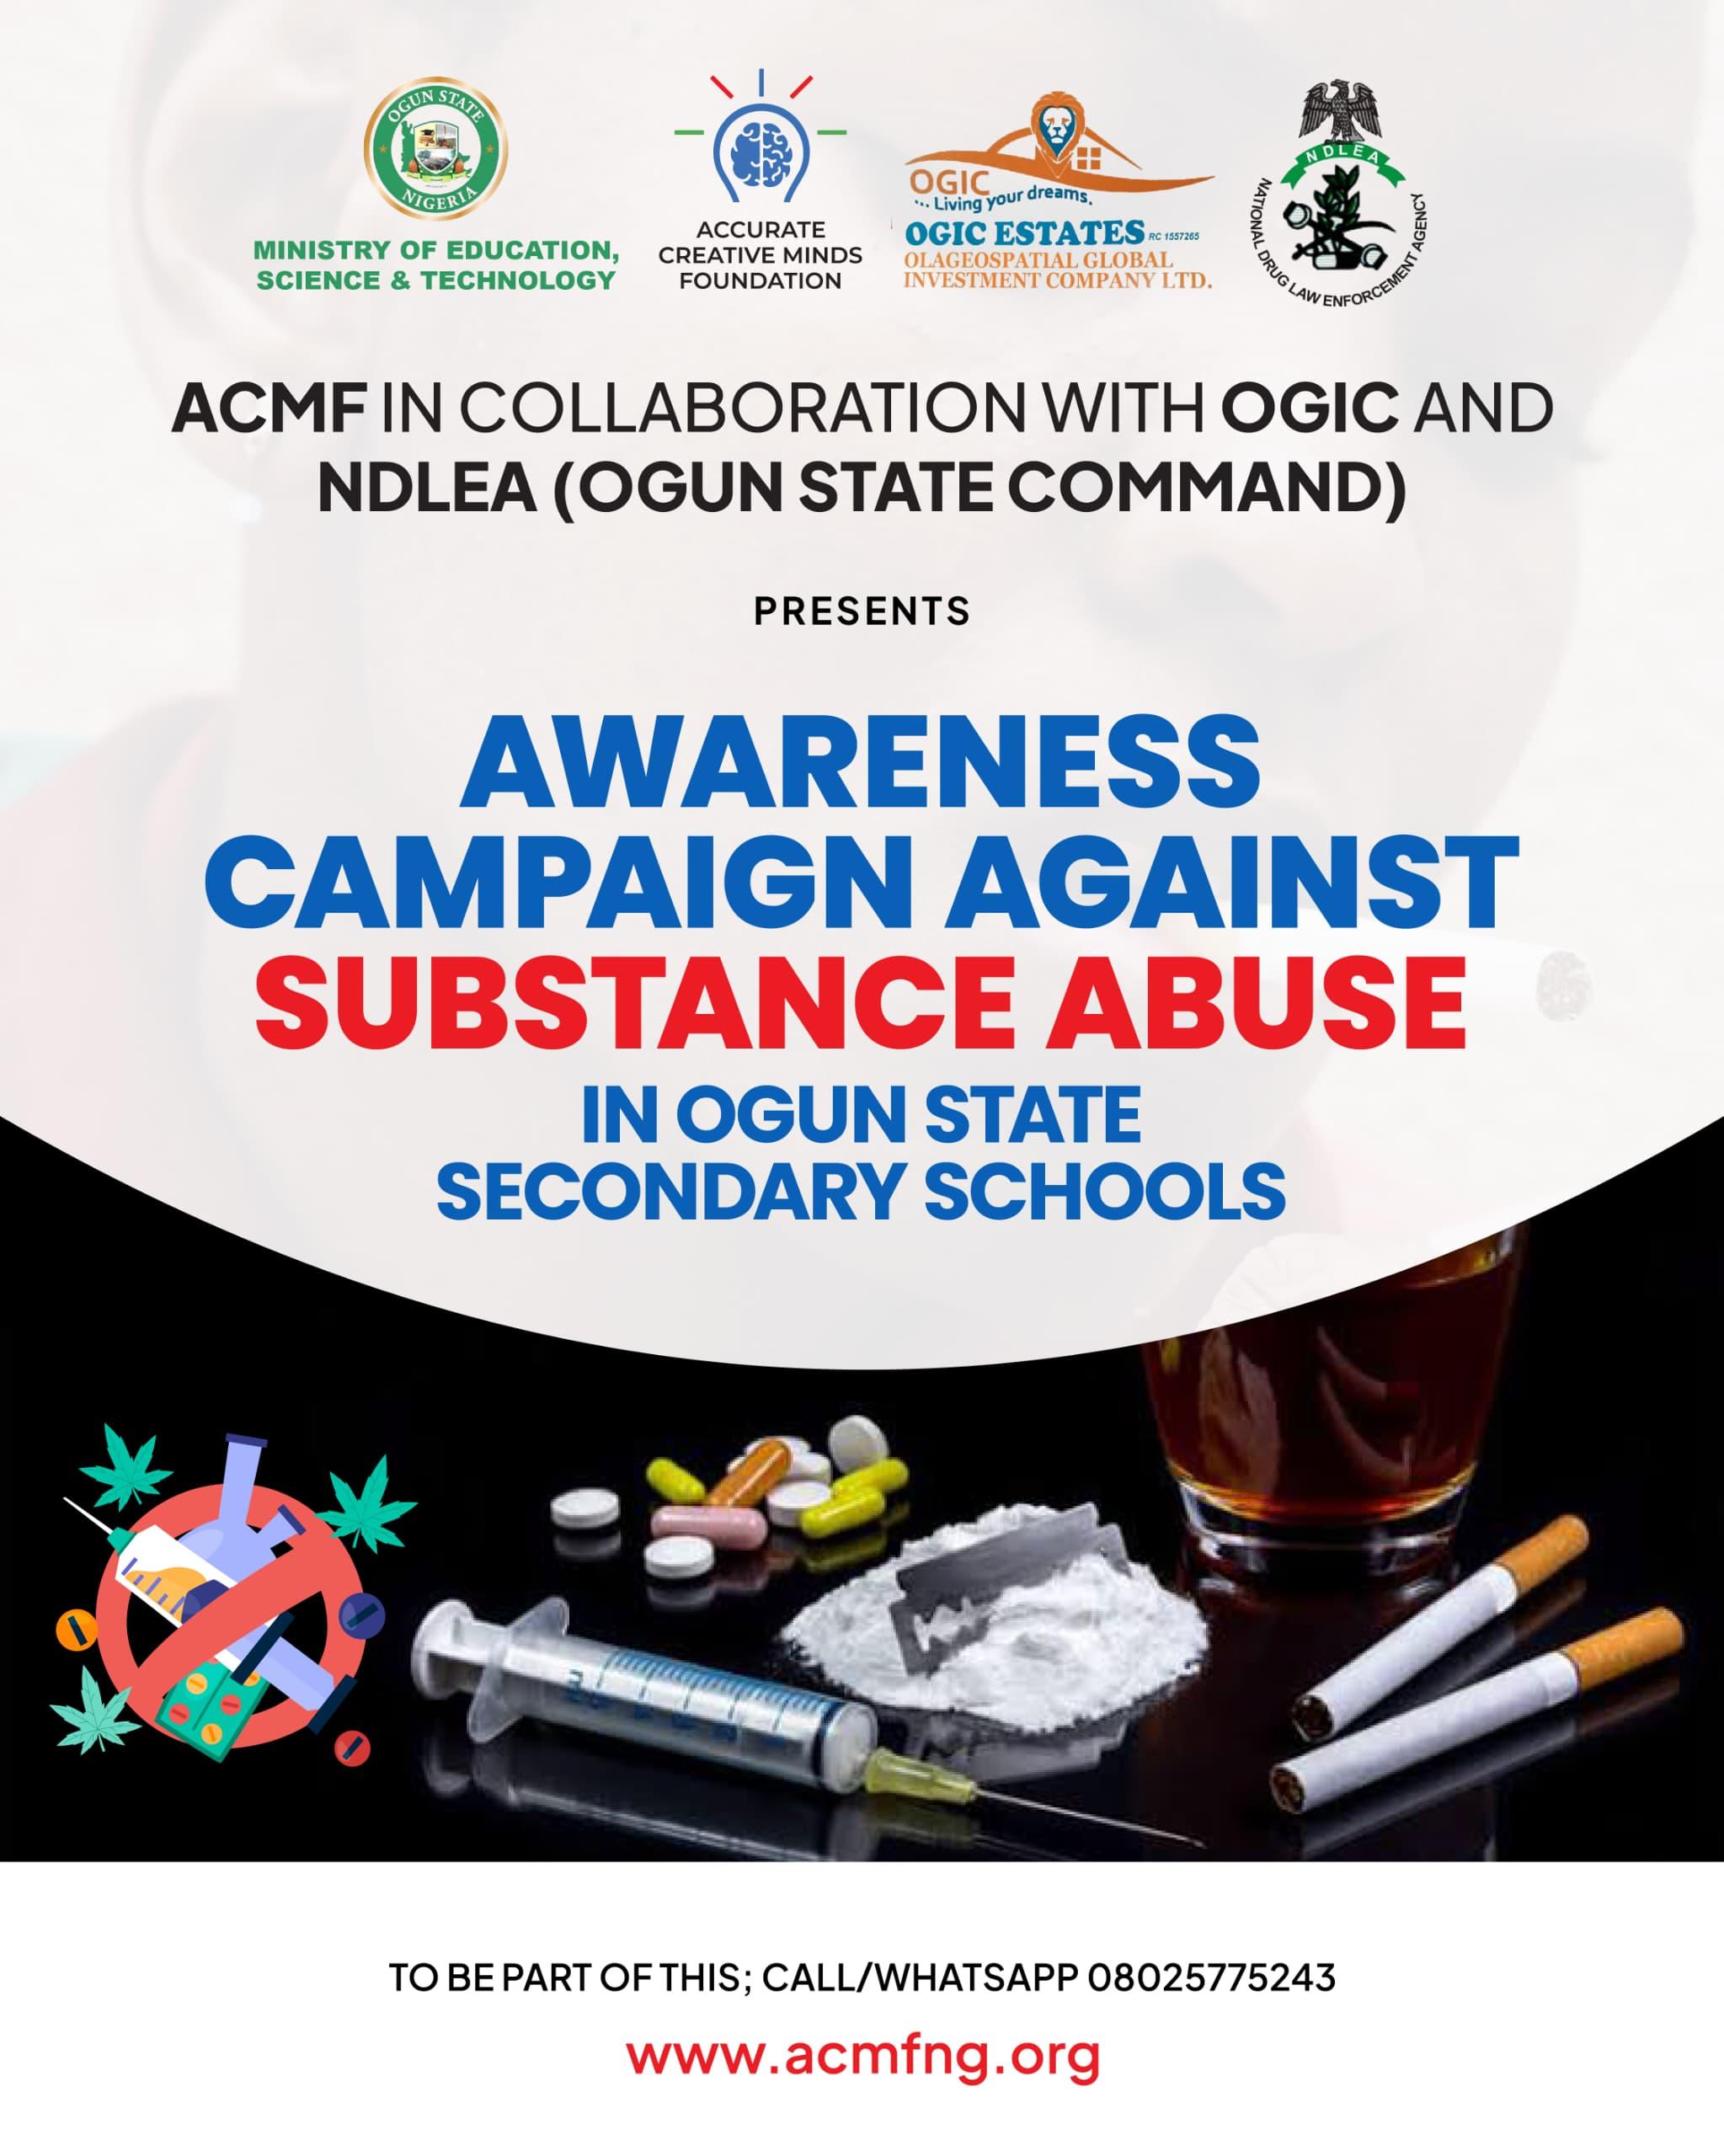 AMCF in collaboration with OGIC and NDLEA Awareness campaign against Substance Abuse in Ogun State secondary schools.